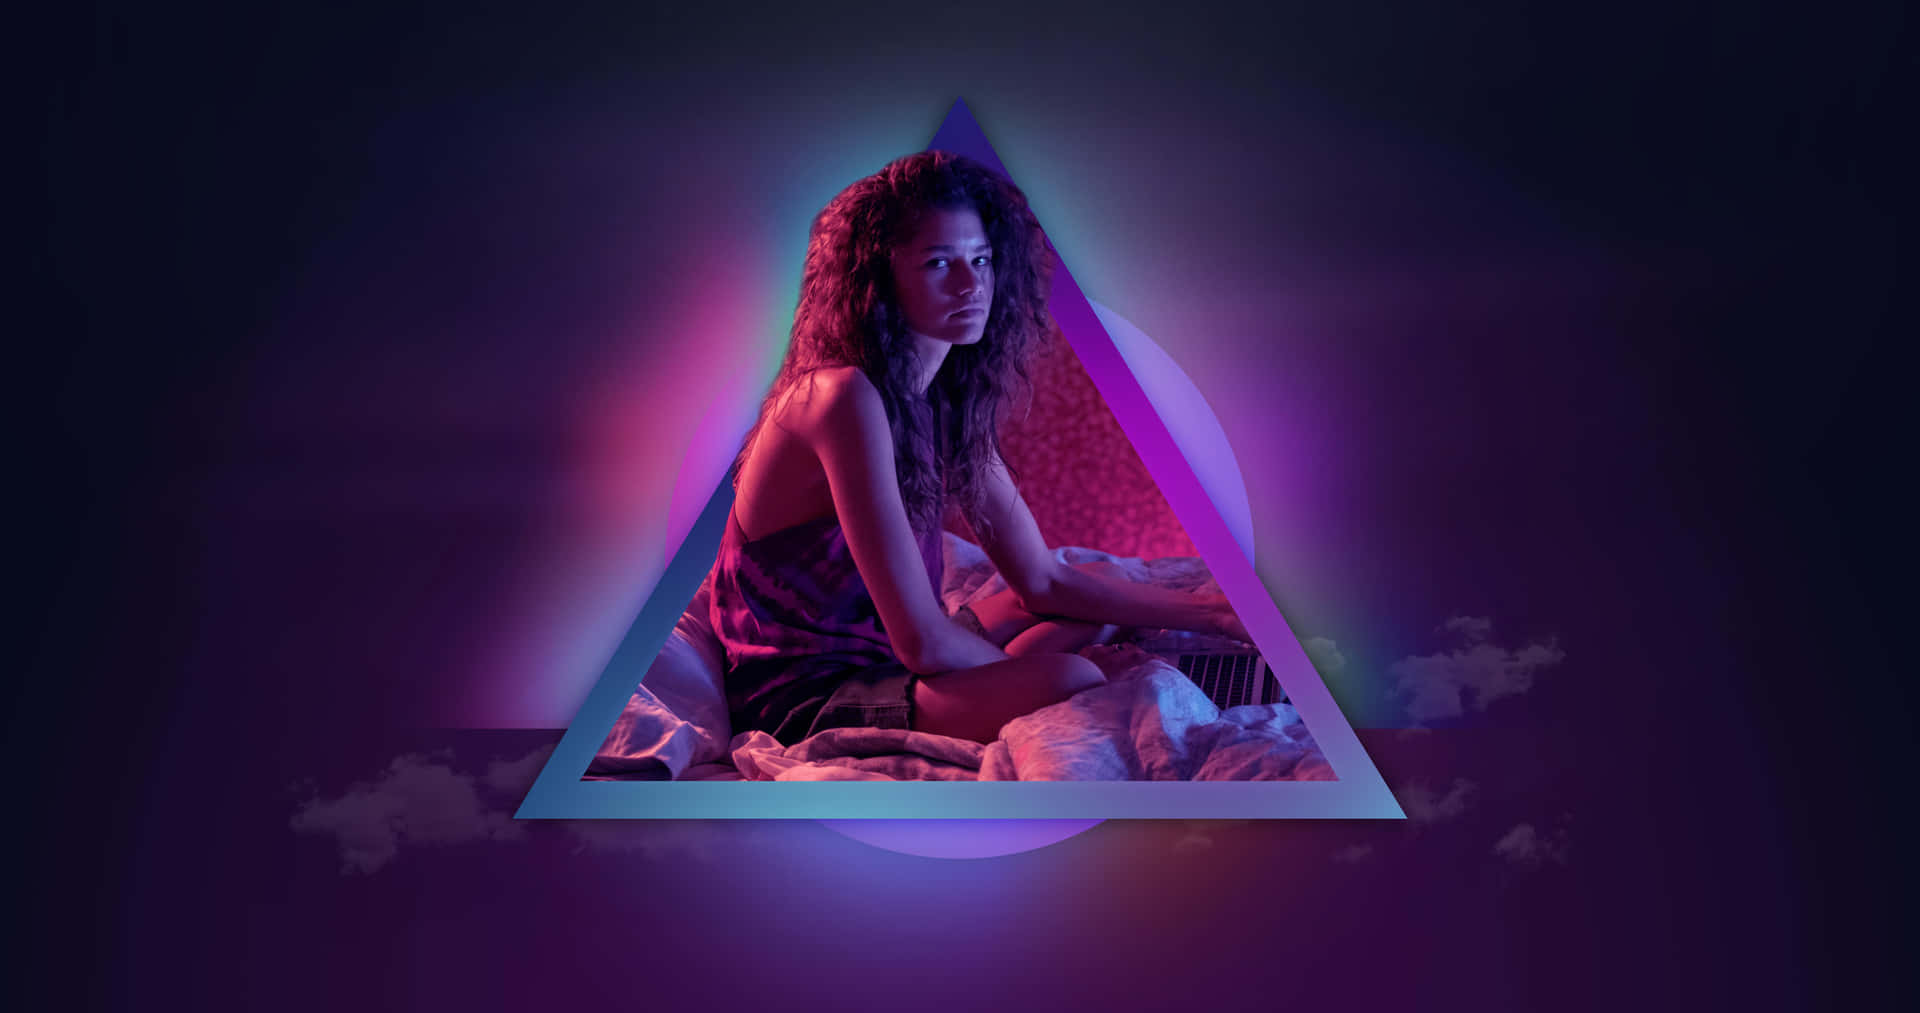 Get ready for Euphoria Season 2 - It's About to Get Even Wilder Wallpaper